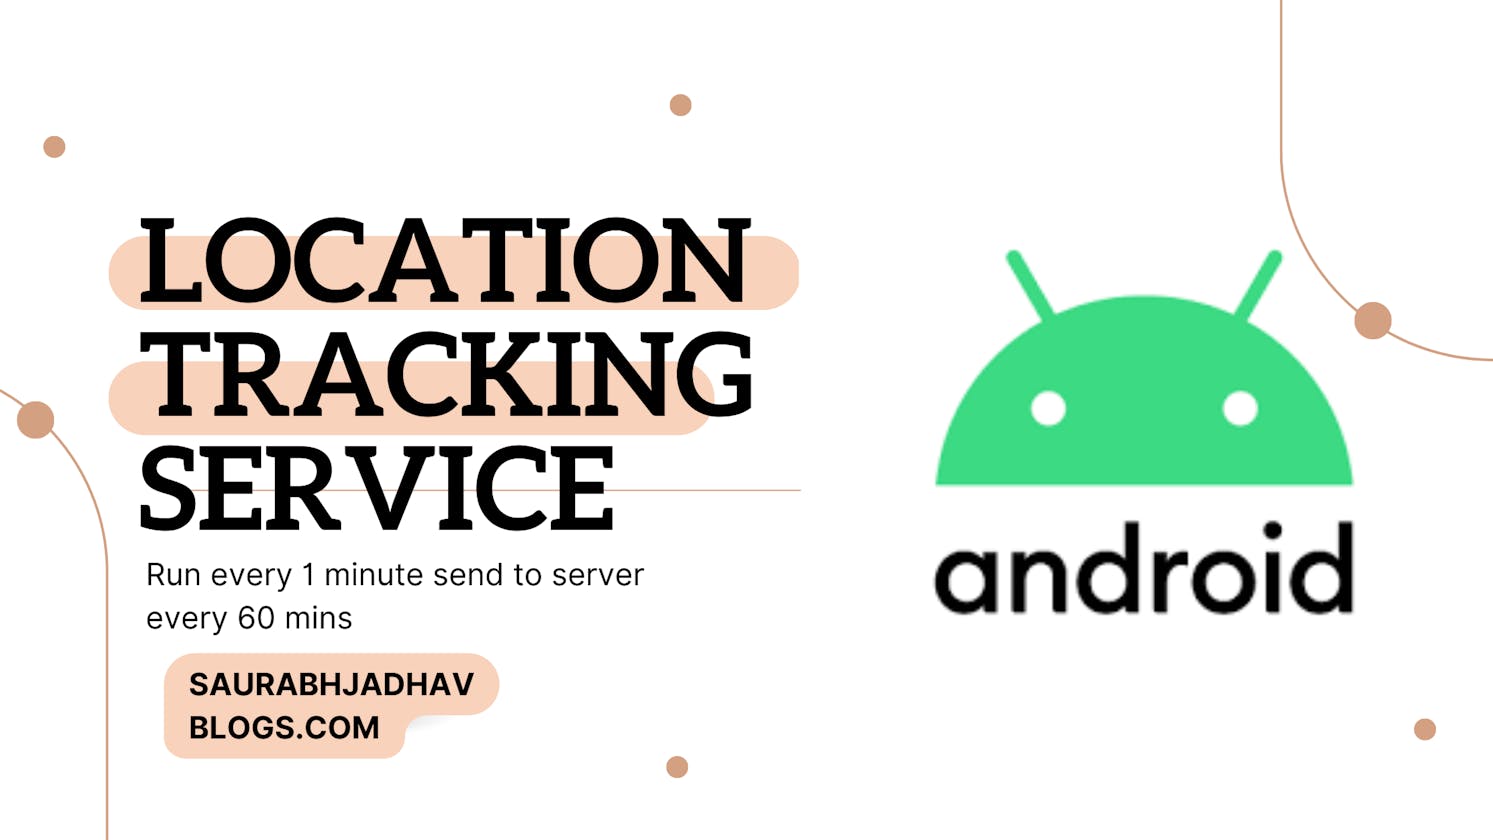 Location tracking service: Run every 1 minute send to server every 60 mins